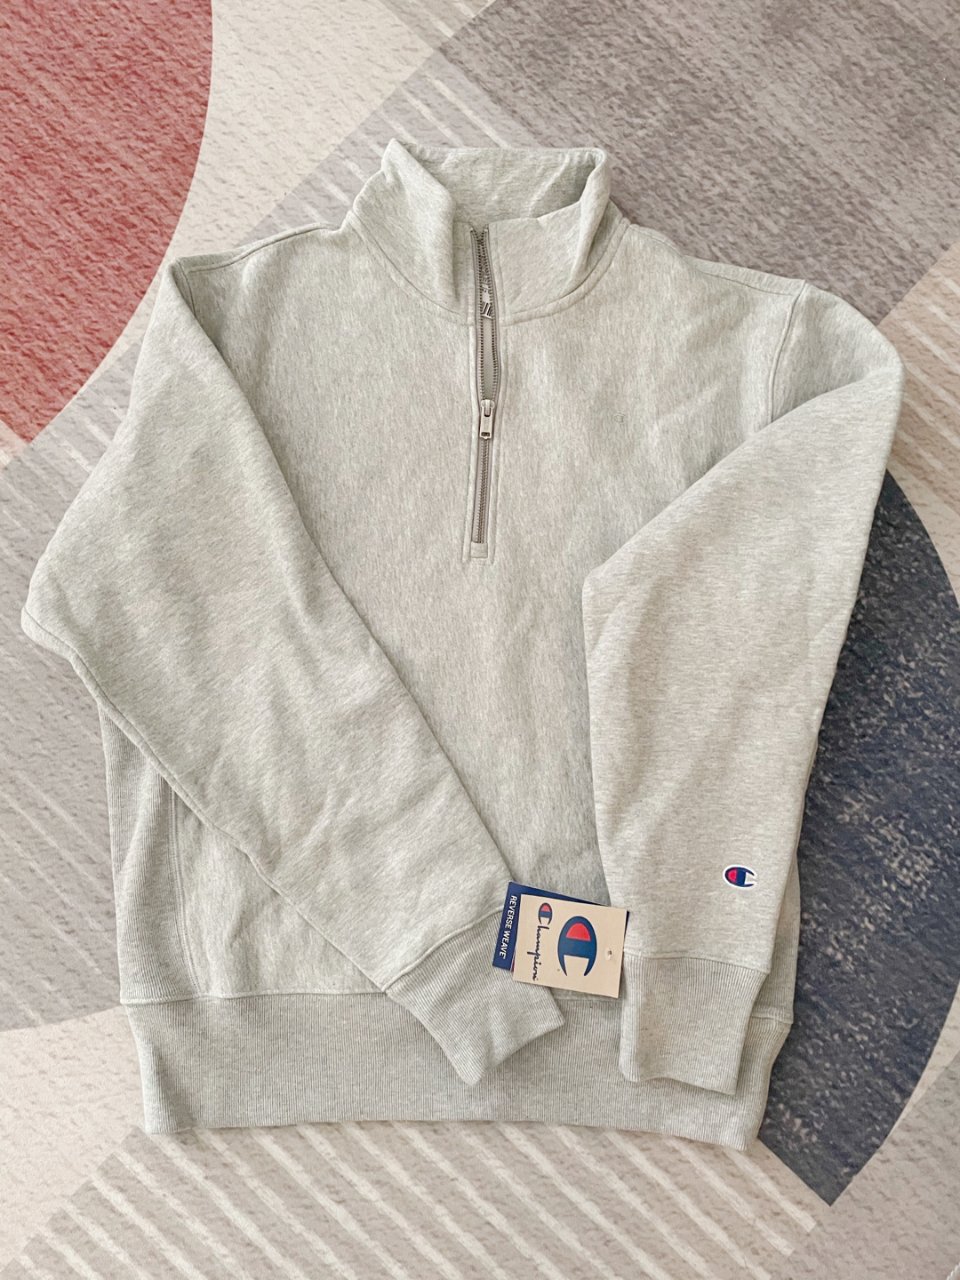 Urban Outfitters,Champion